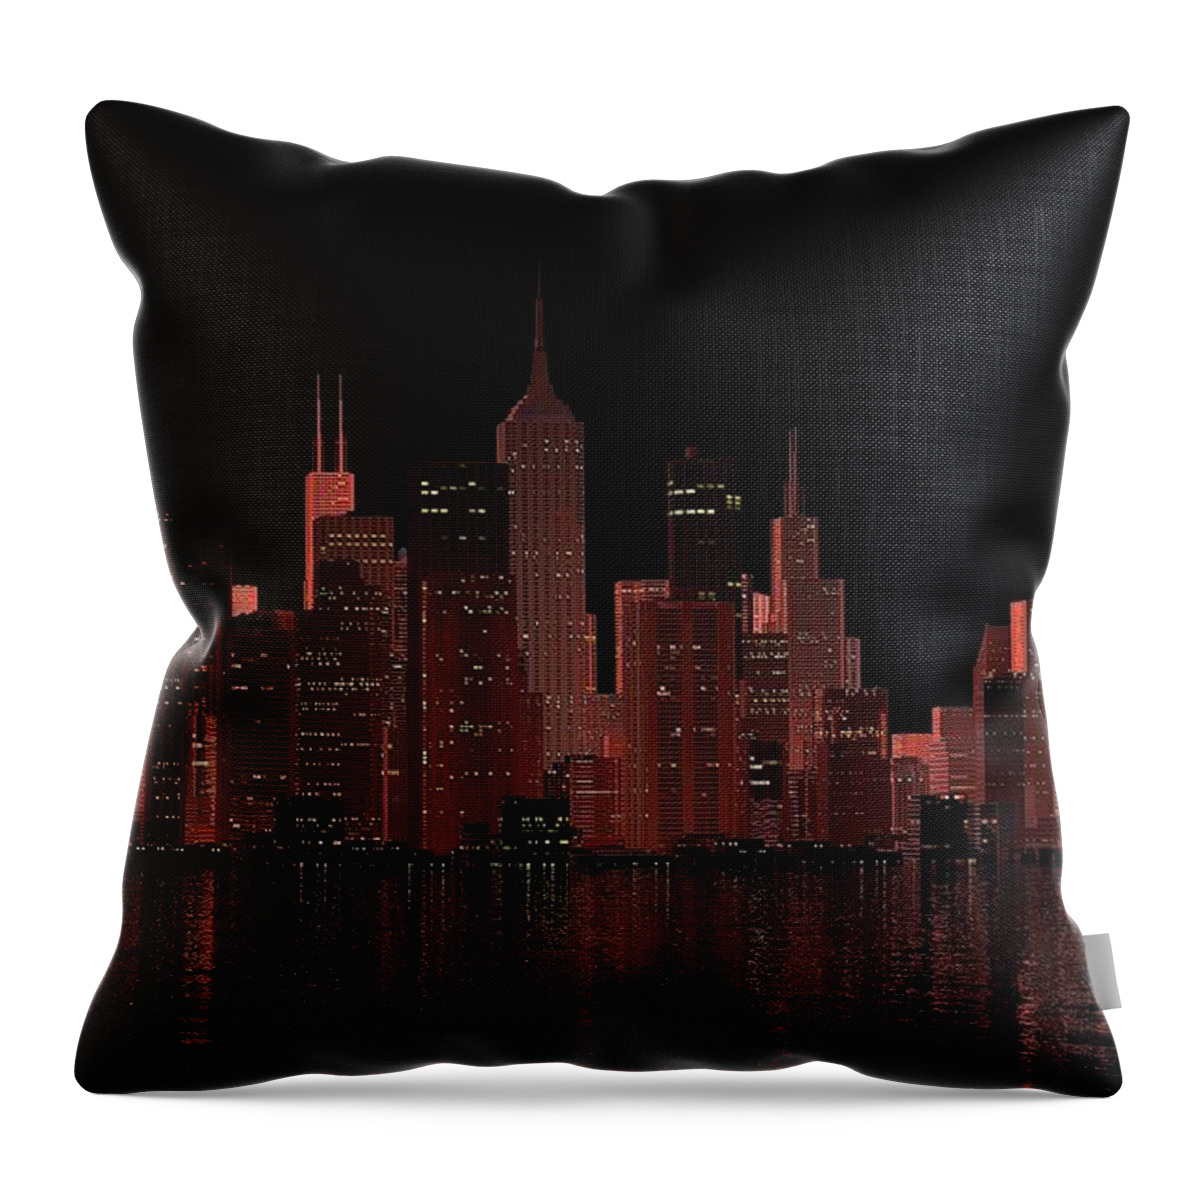 City Throw Pillow featuring the digital art Chicago City Dusk by Louis Ferreira